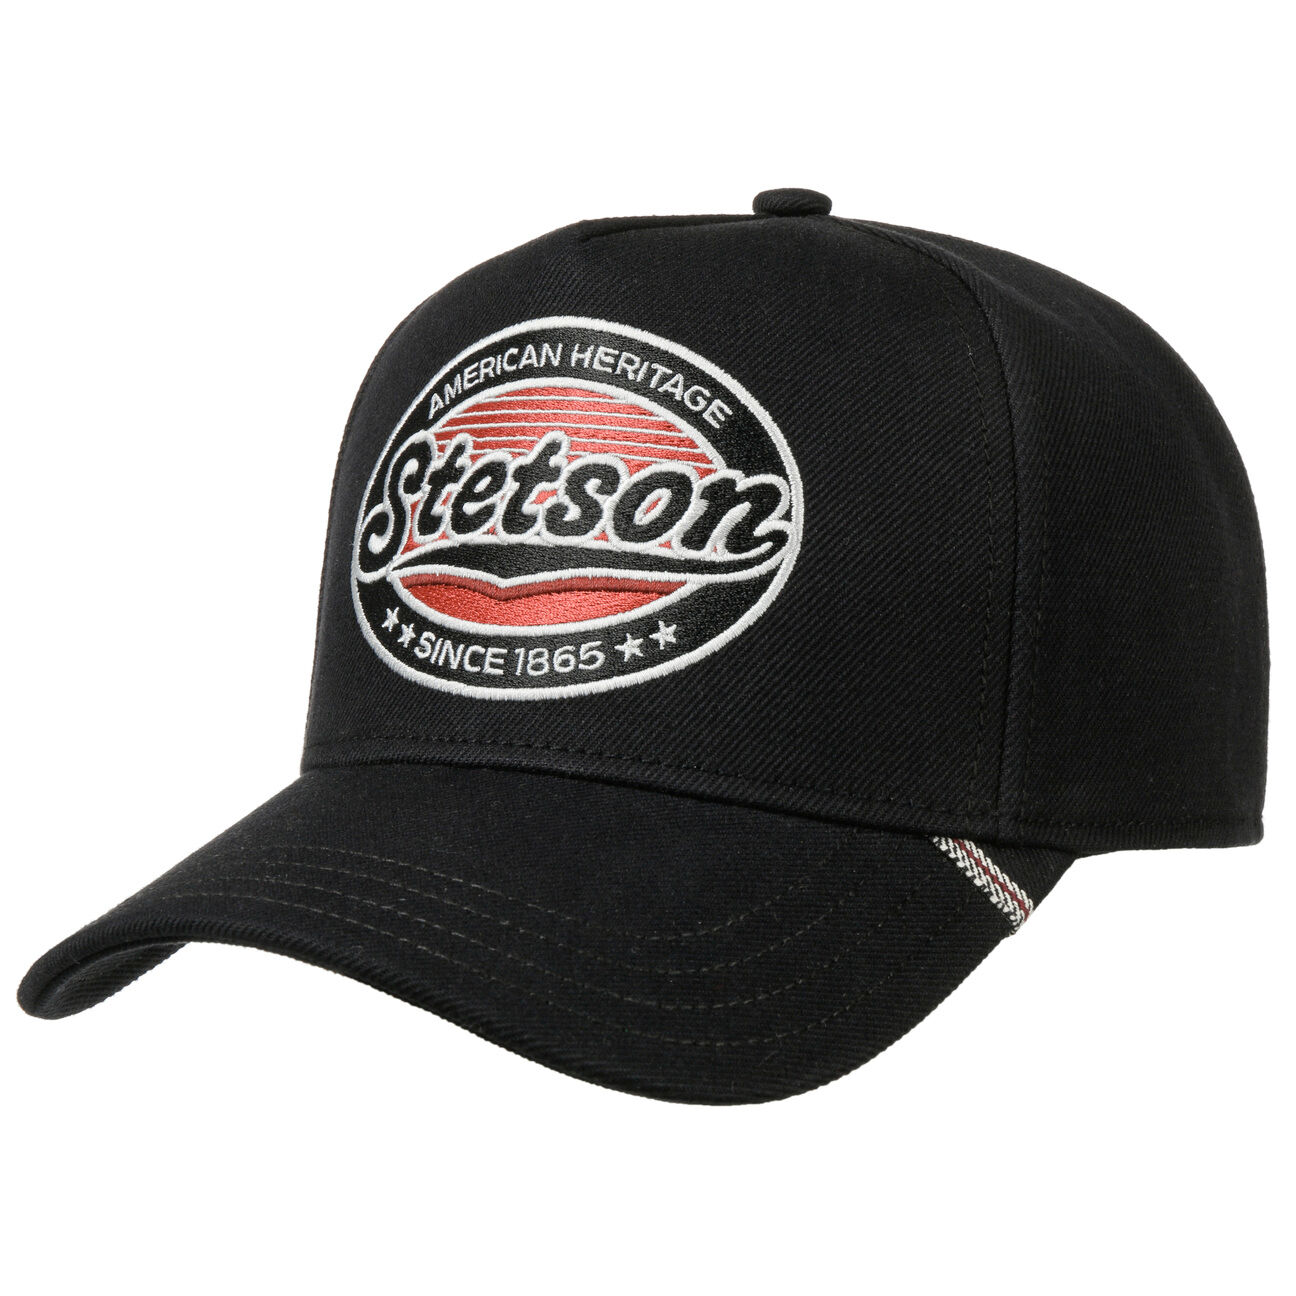 Selvage Denim Cap by Stetson - black - Female - Size: One Size